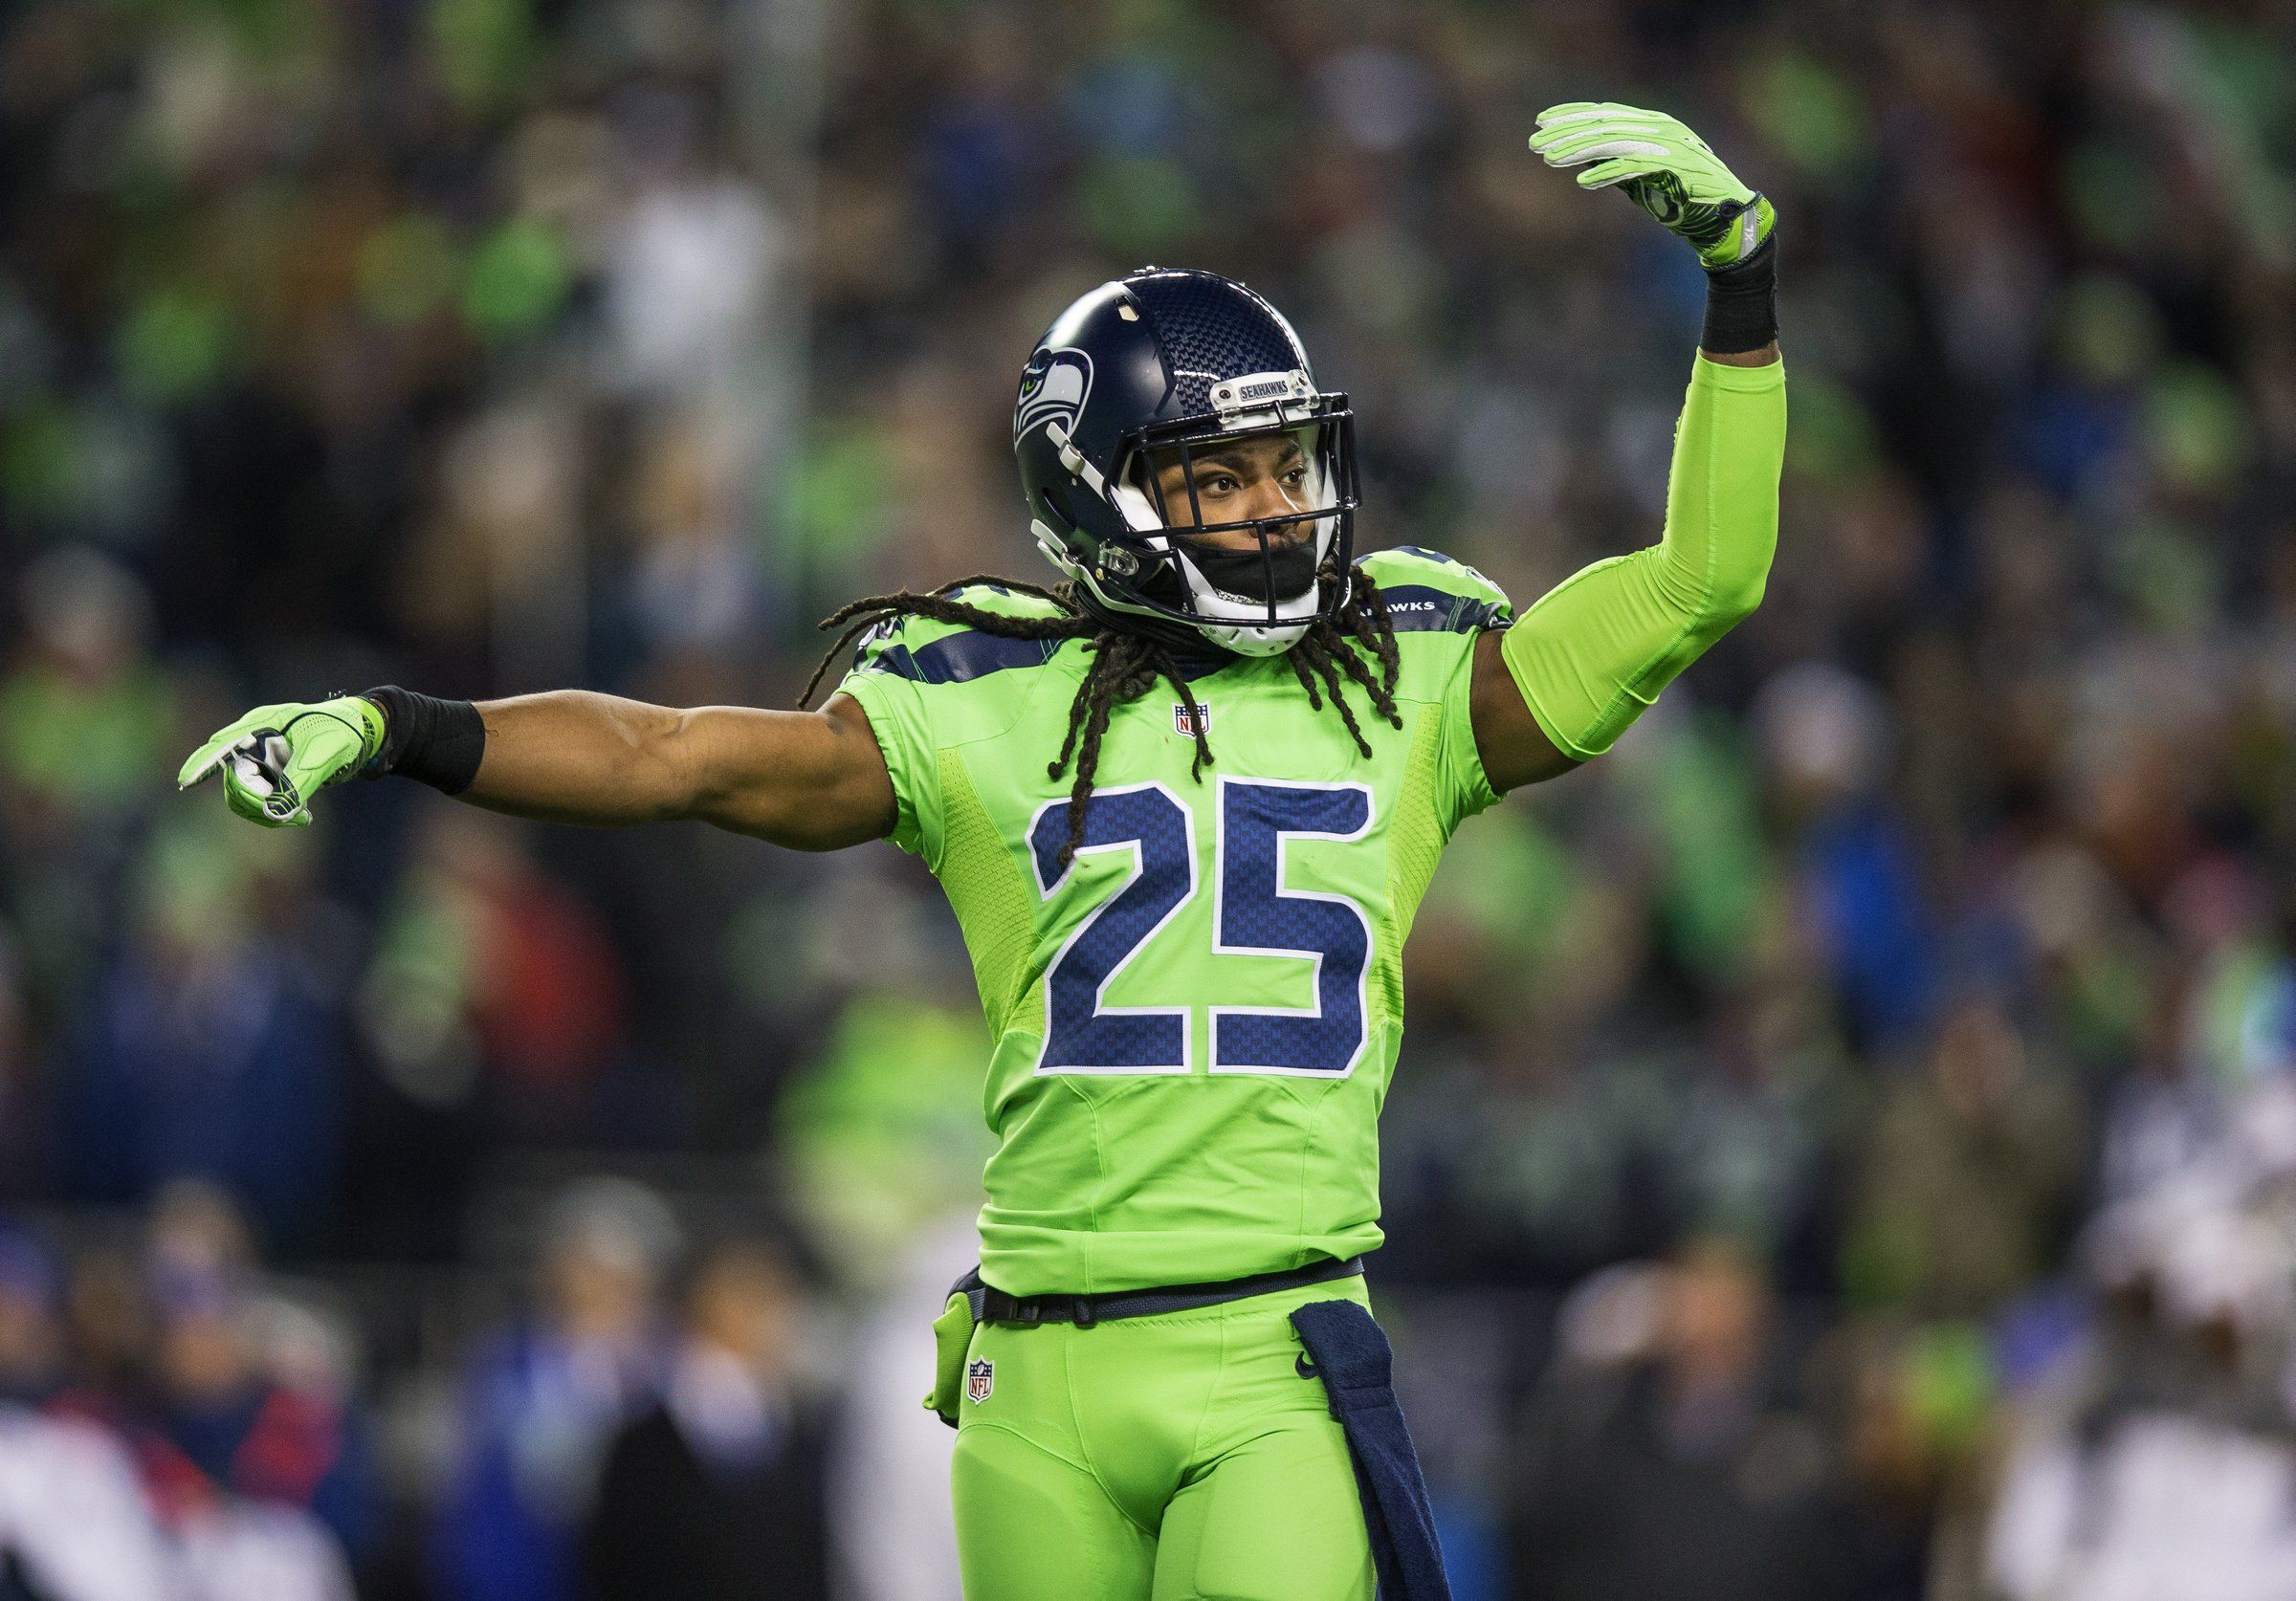 the Seahawks' 'Action Green' uniforms 